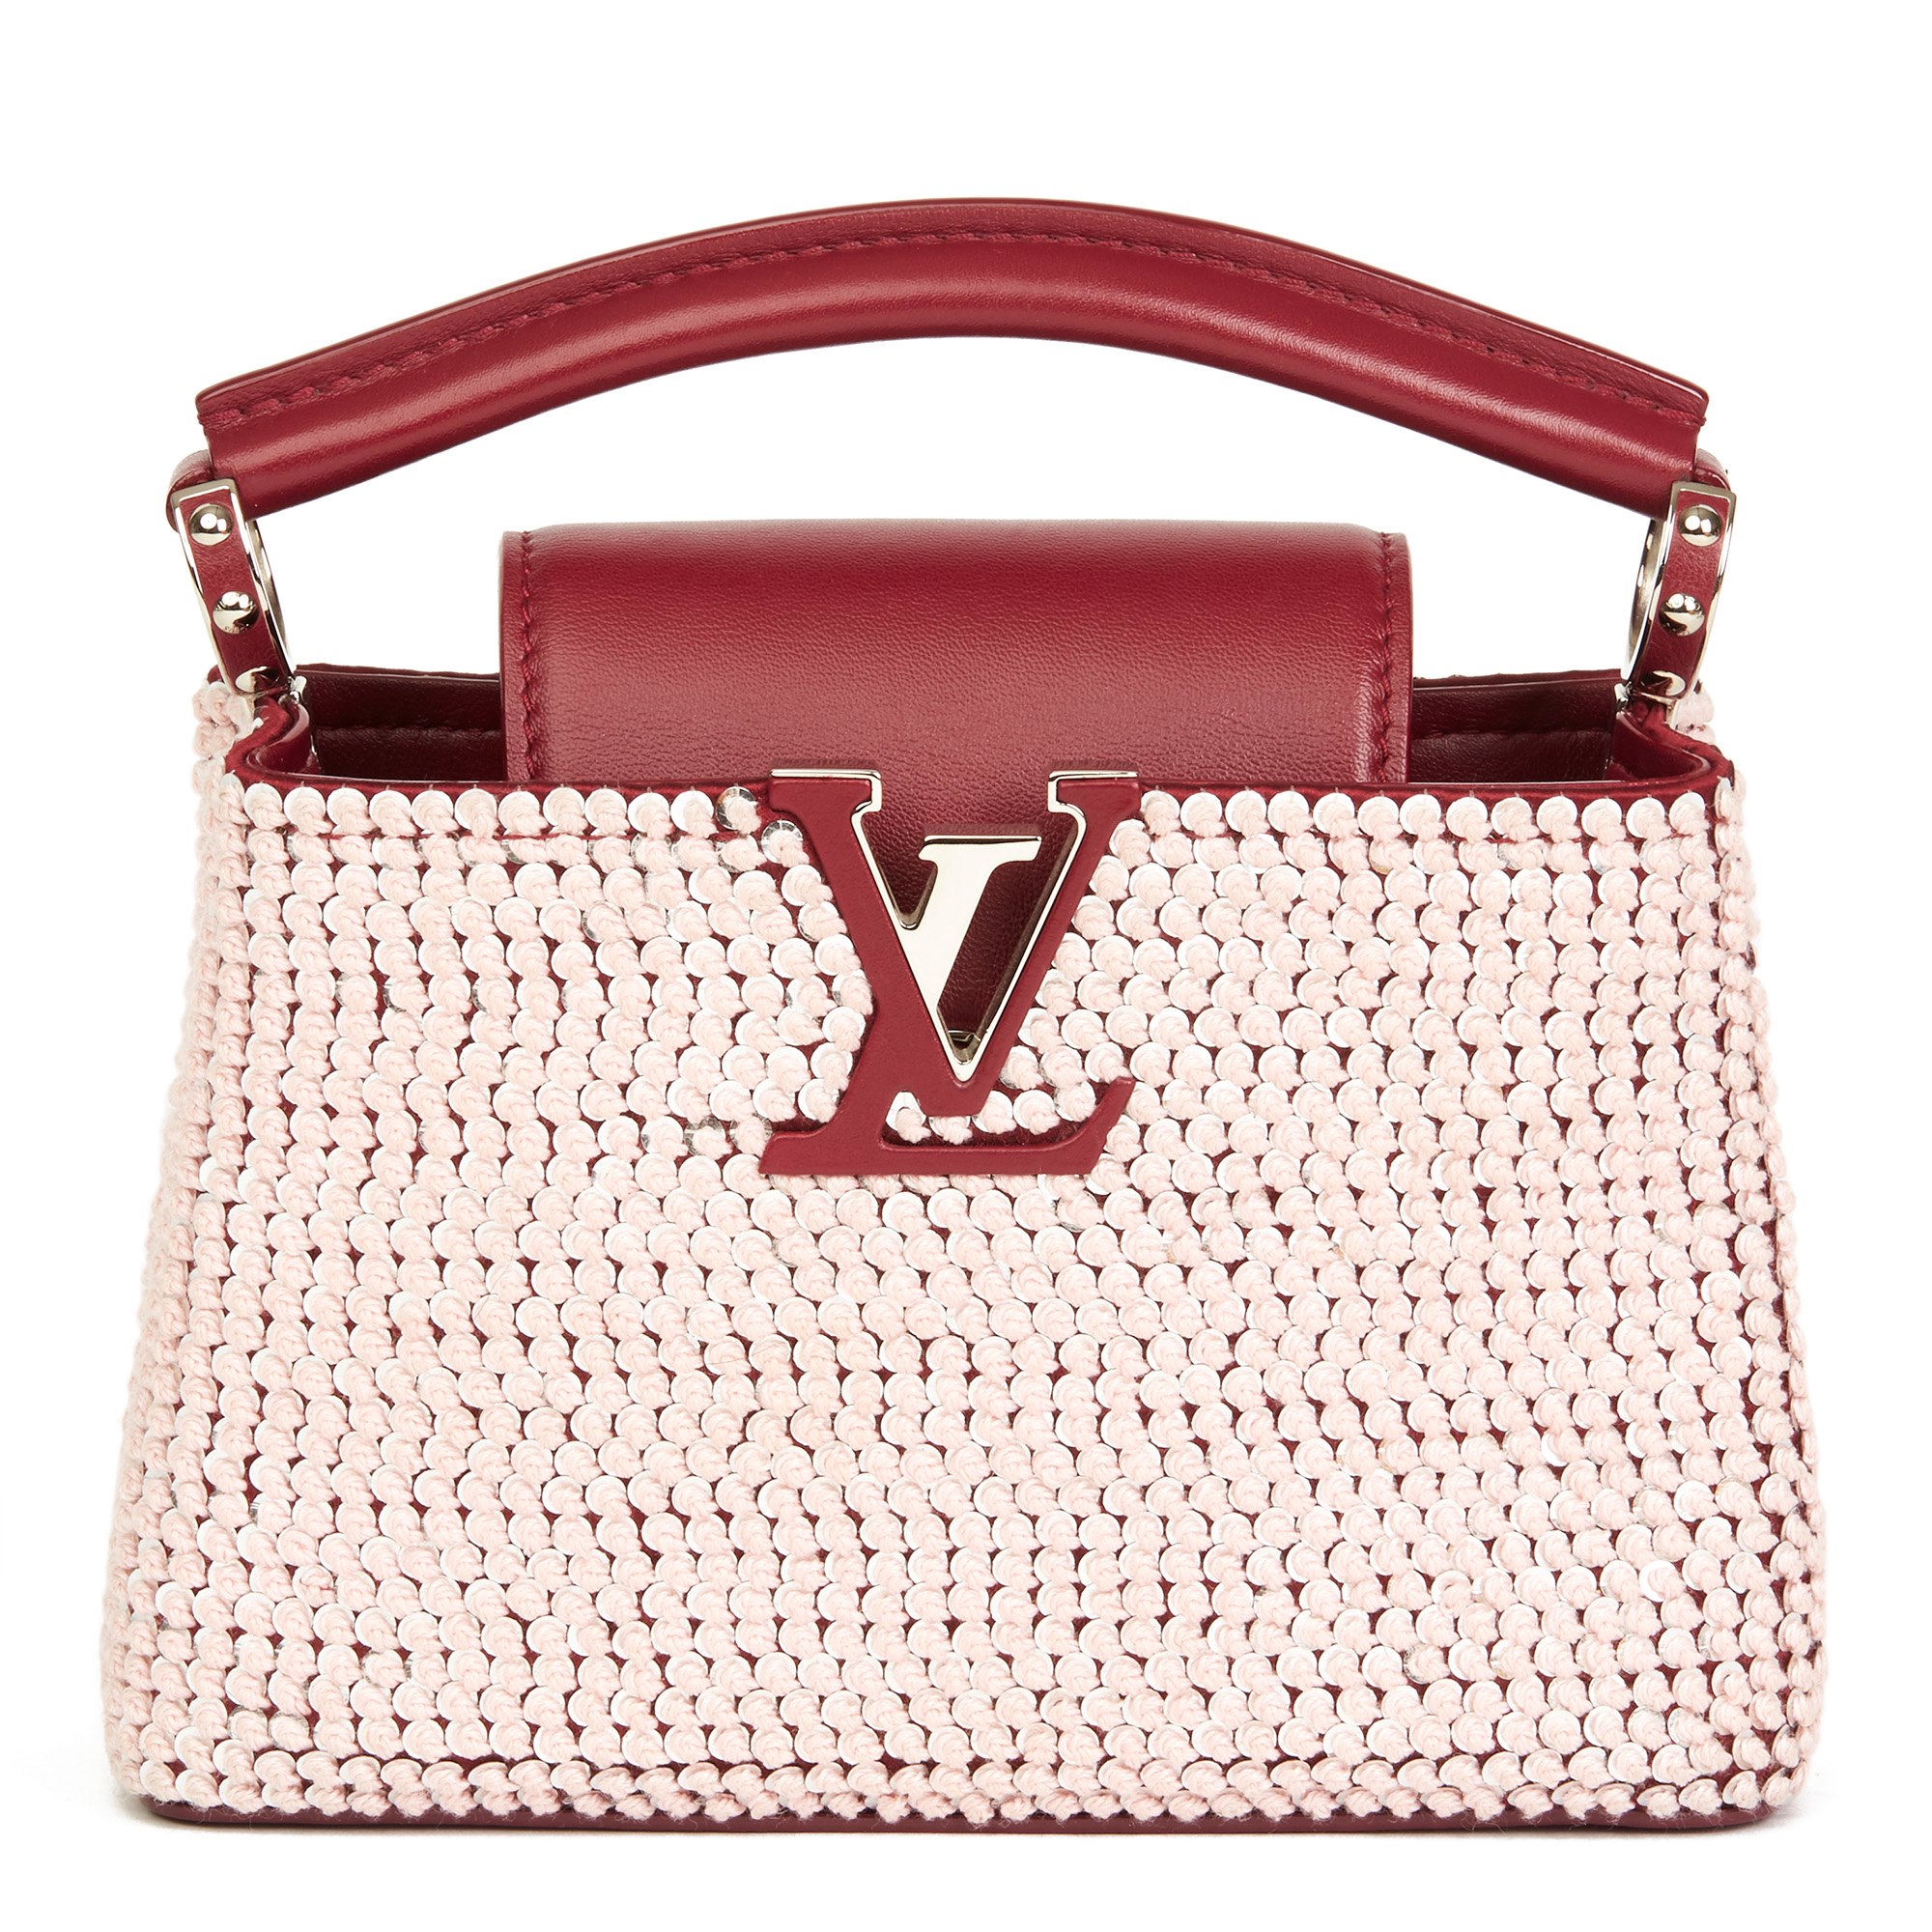 Louis Vuitton Capucines Mini Bag worn by Charlize Theron Sugarfish March 3,  2020